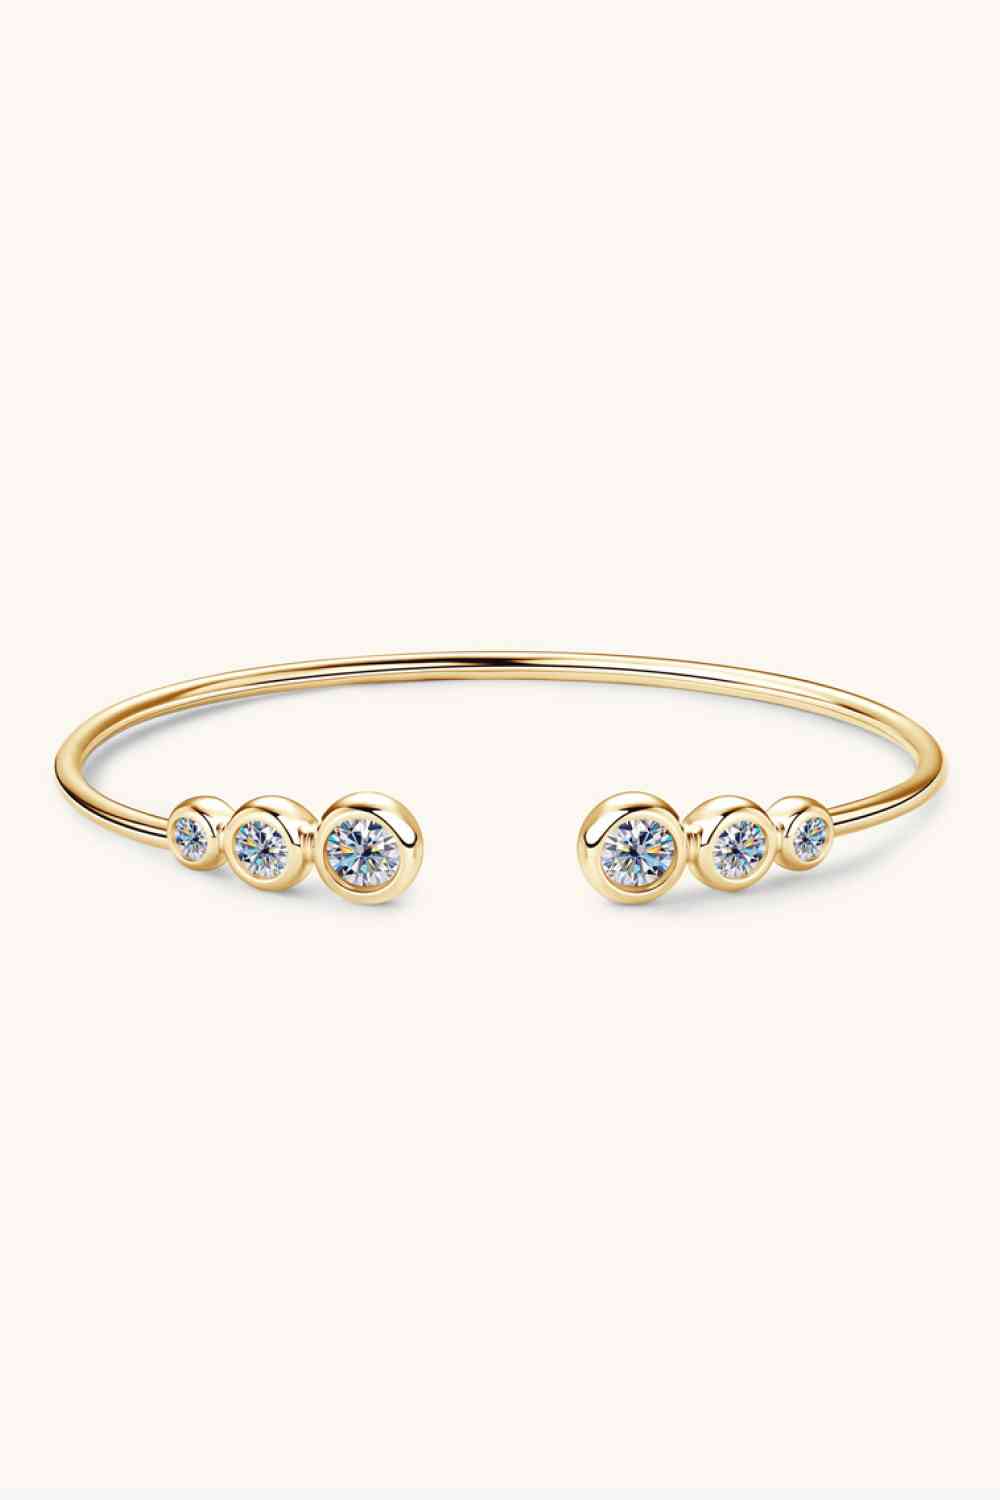 A minimalist 1.8 Carat Moissanite 925 Sterling Silver Bracelet with an open design, featuring three round, sparkling moissanite gemstones on each end. The sleek, delicate bracelet from Marianela's Exclusive Shop, LLC rests on a light, off-white background.